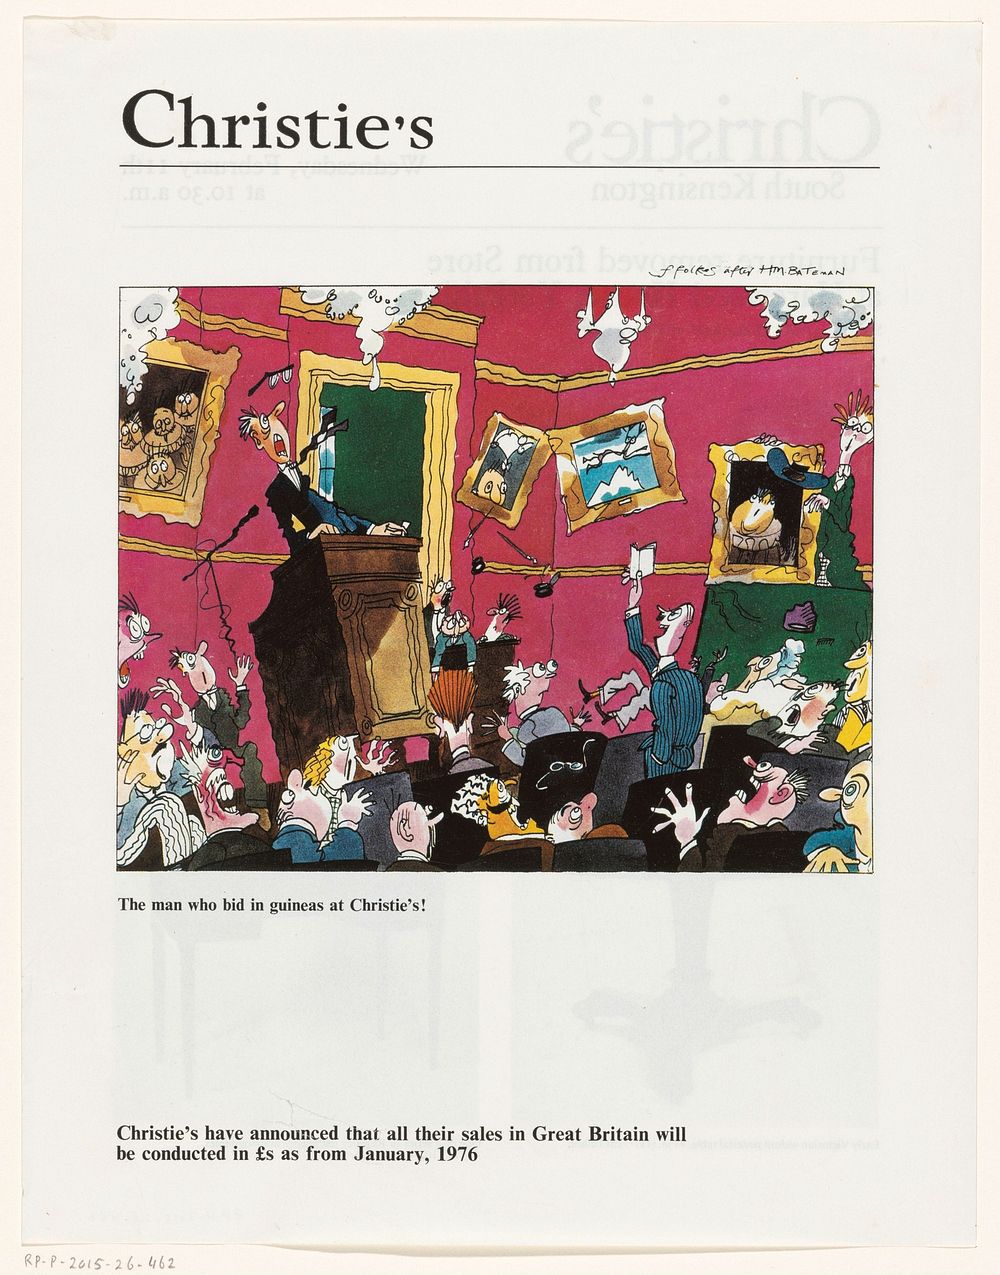 Veiling bij Christie's (1975 - 1976) by anonymous, Michael Ffolkes and Henry Mayo Bateman